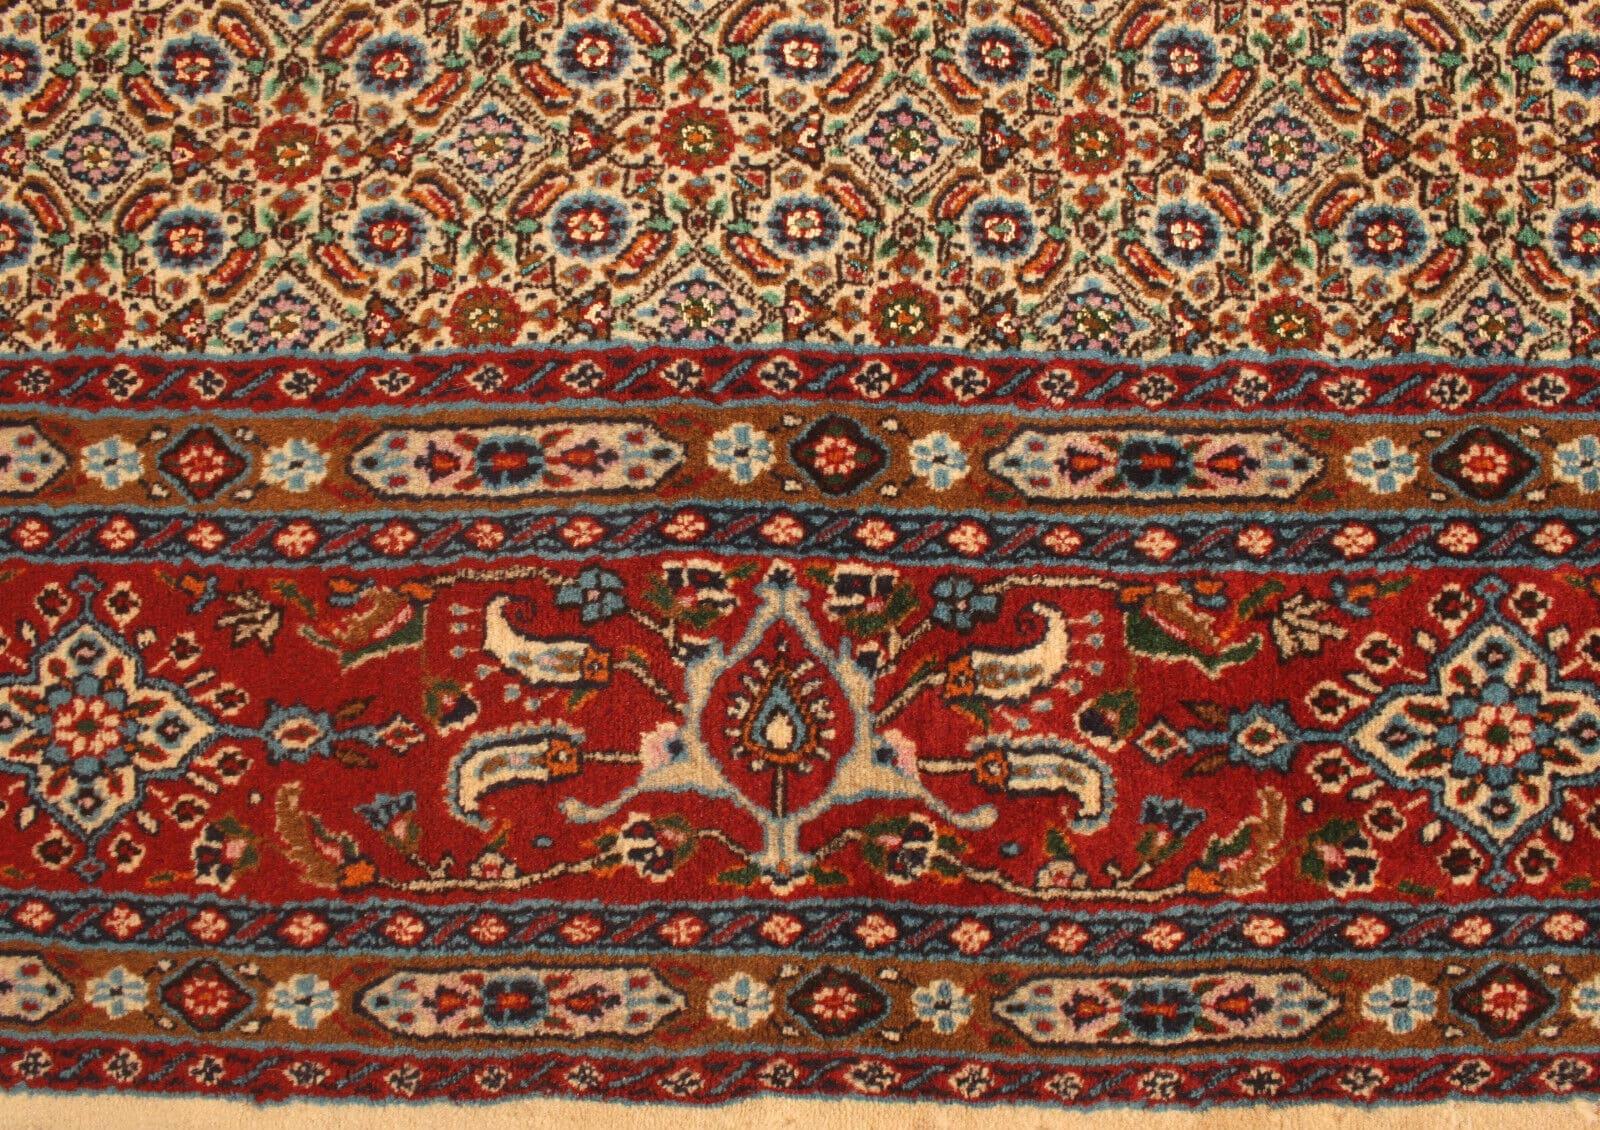 Handmade Vintage Indian Mahal Rug (6.3’ x 9.8’)

Discover the charm of traditional craftsmanship with our Handmade Vintage Indian Mahal Rug from the 1970s. This woolen treasure, measuring 6.3’ x 9.8’, is a splendid representation of the Persian